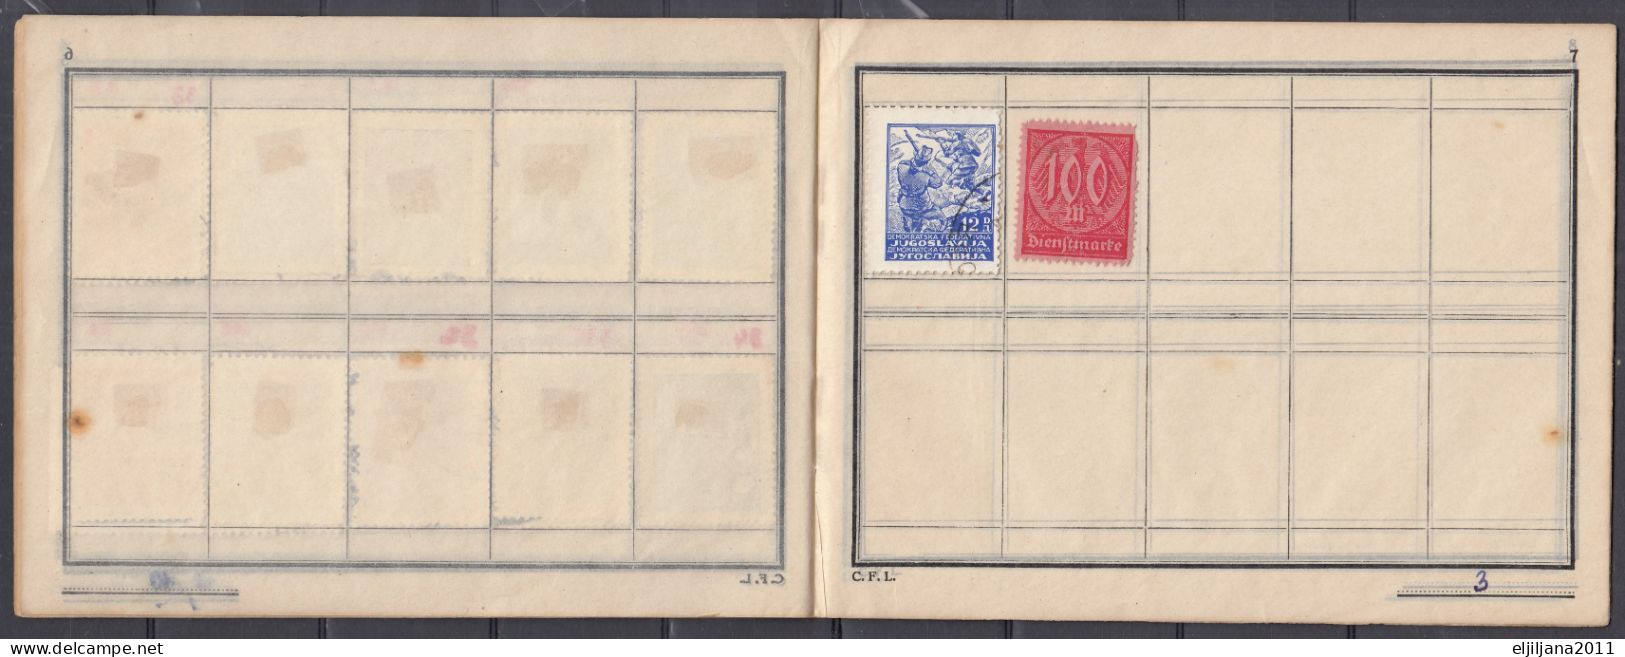 ⁕ Yugoslavia ⁕ old album - booklet with stamps (9 blank sheets) 14.5 x 11 cm ⁕ 74 used stamps - Tito / Partisans - scan